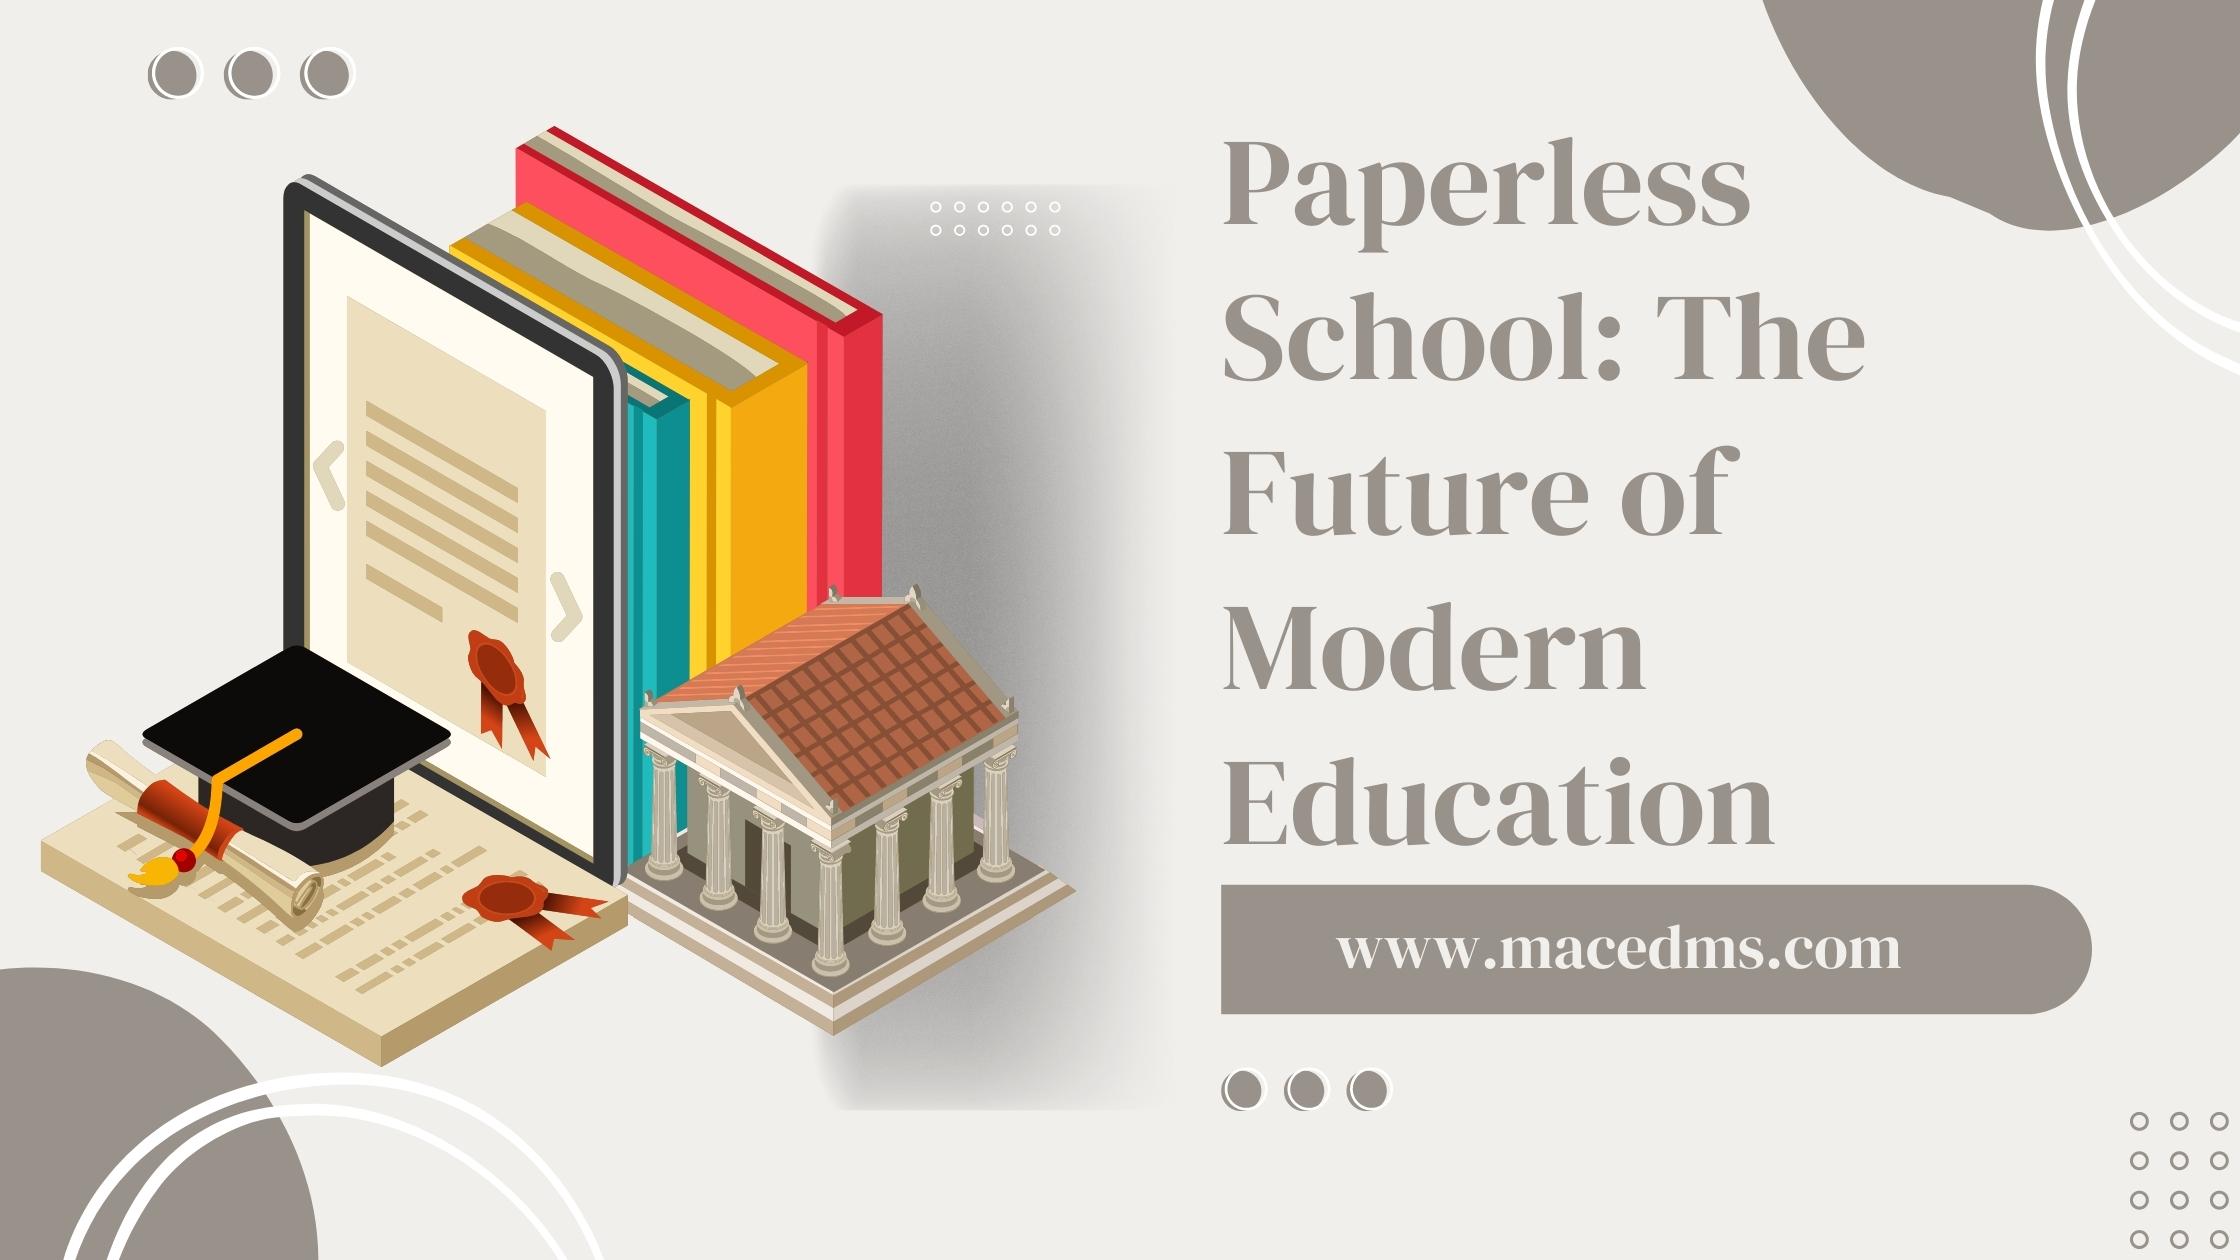 Paperless School: The Future of Modern Education